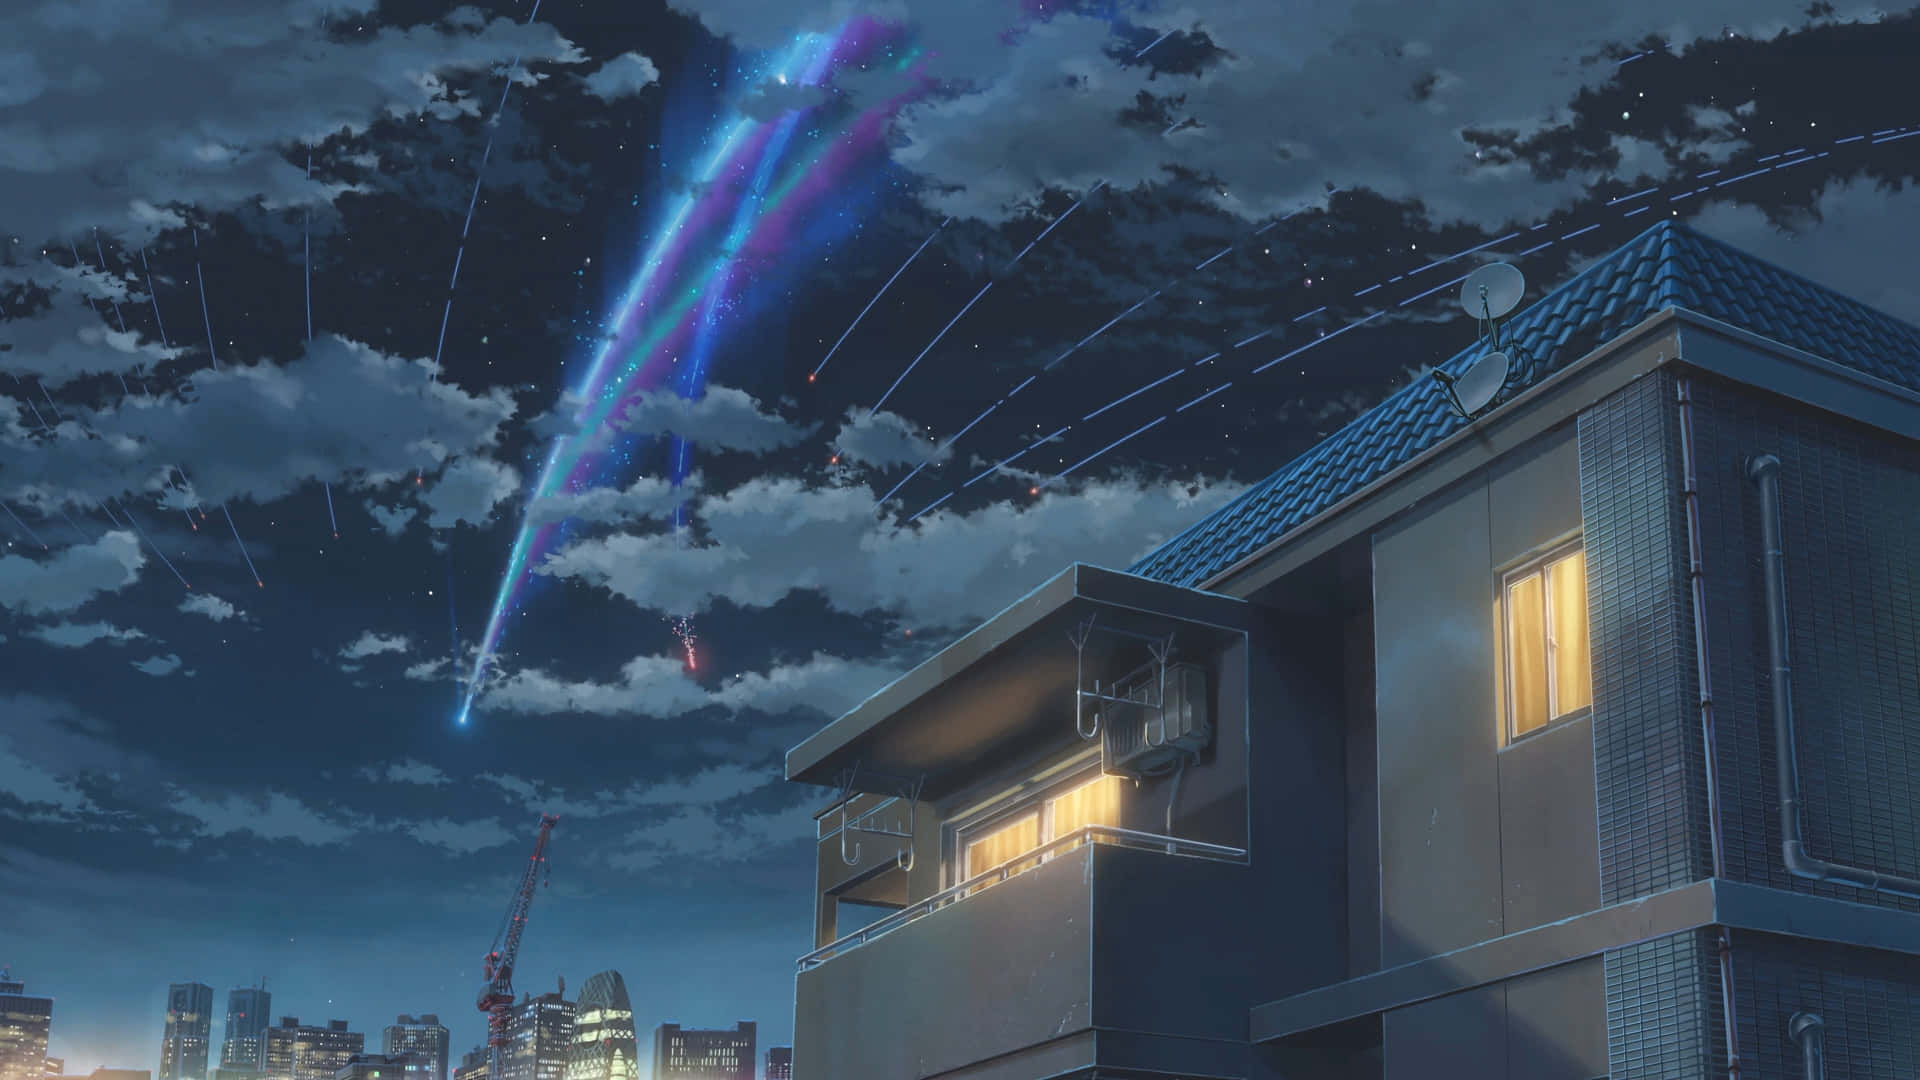 Makoto Shinkai, the creator of acclaimed films such as Your Name and Weathering With You